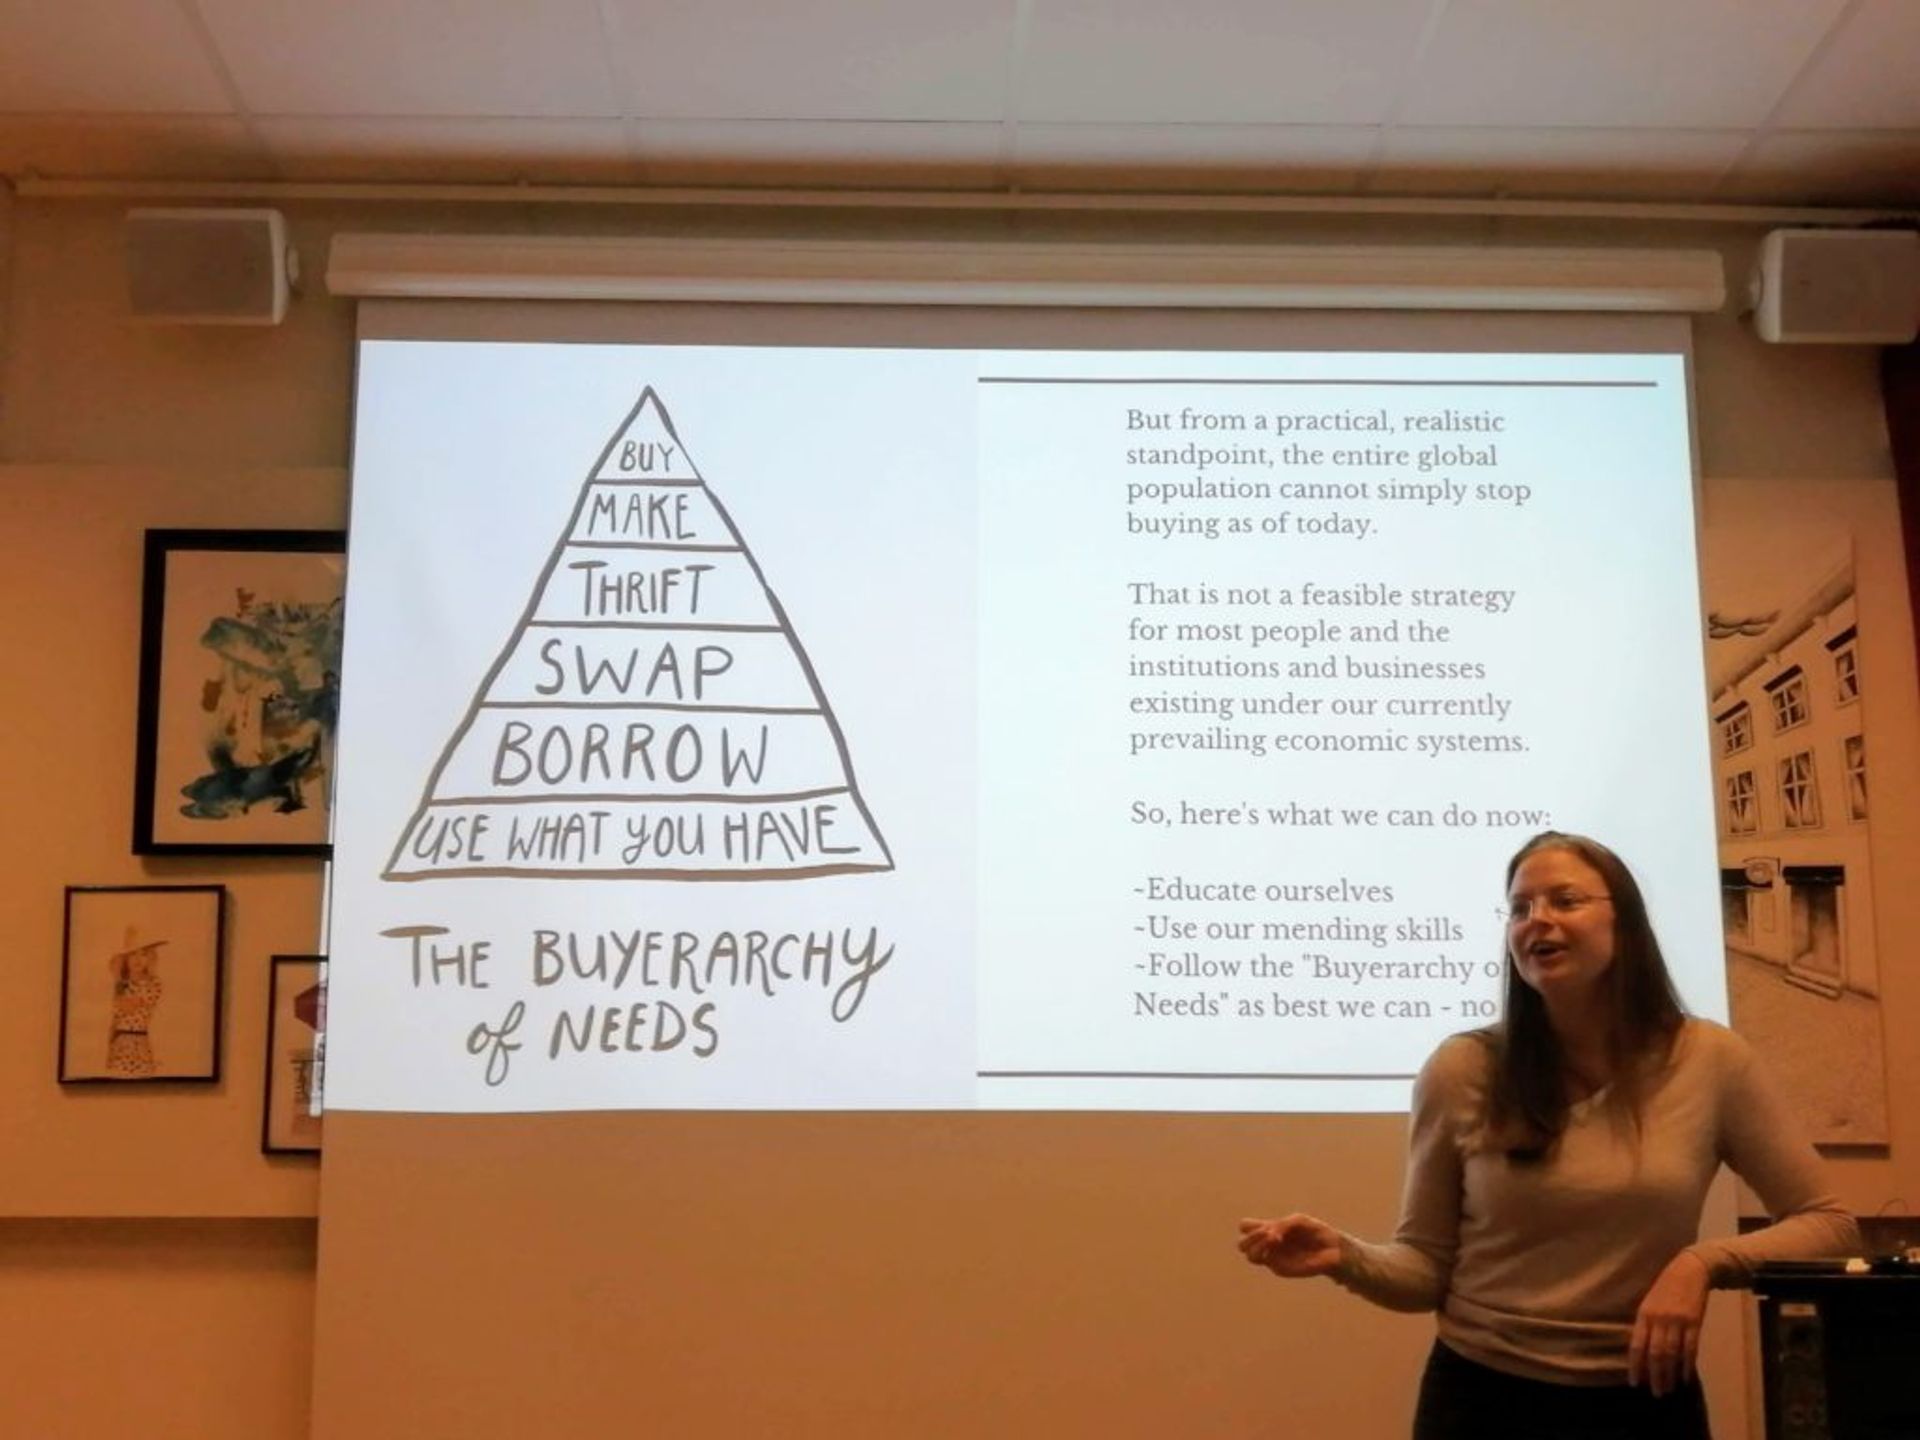 Cirrus presenting The Buyrarchy of Needs at 2019 Hållbar Student Handcraft and Mending Workshop